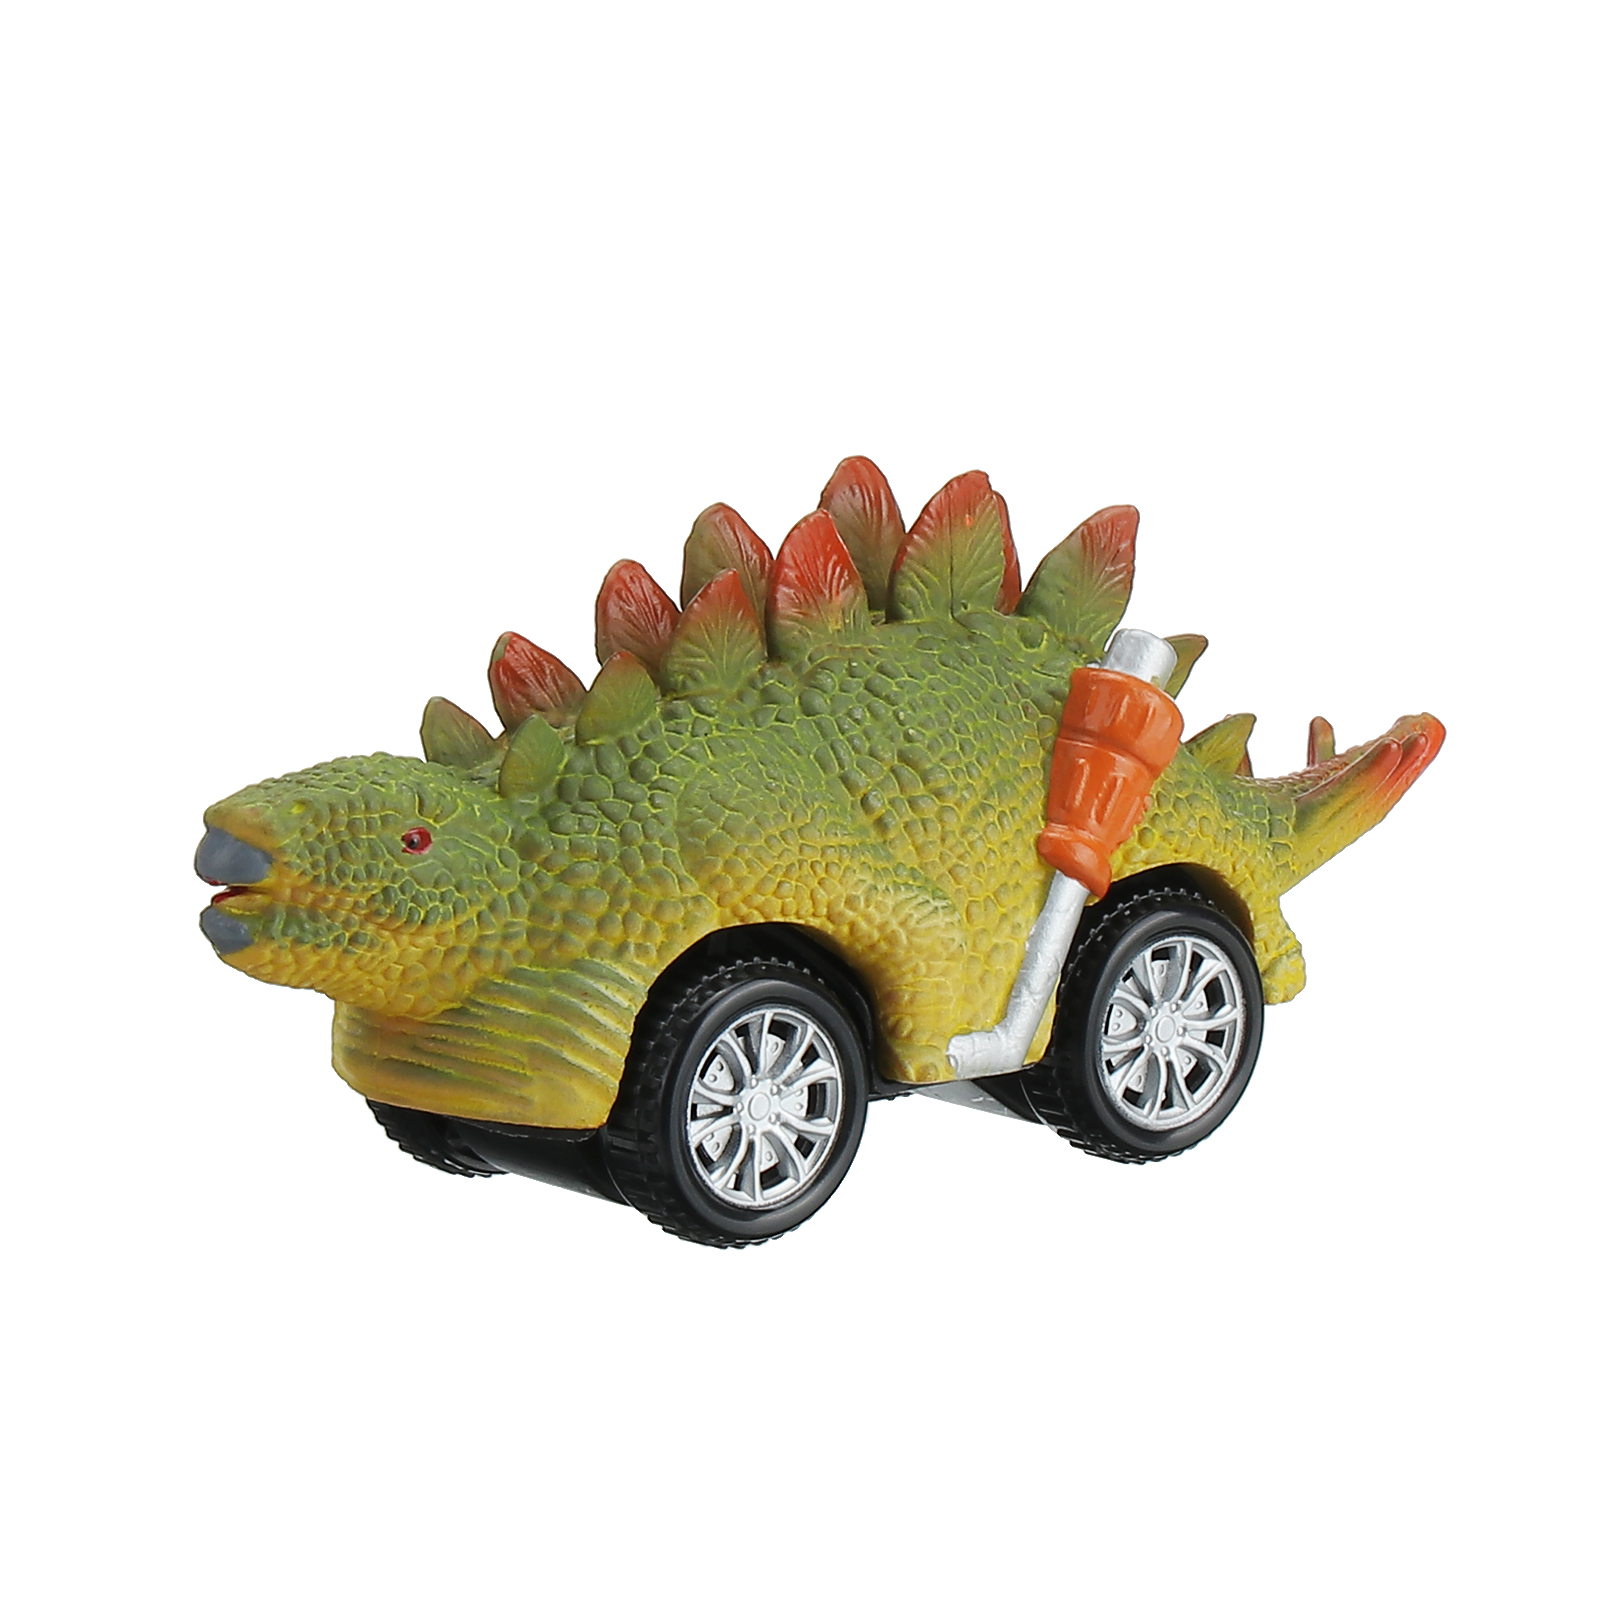 Pickwoo-Dinosaur-Toys-Cars-Inertia-Vehicles-Toddlers-Kids-Dinosaur-Party-Games-with-T-Rex-Dino-Toys--1895631-11